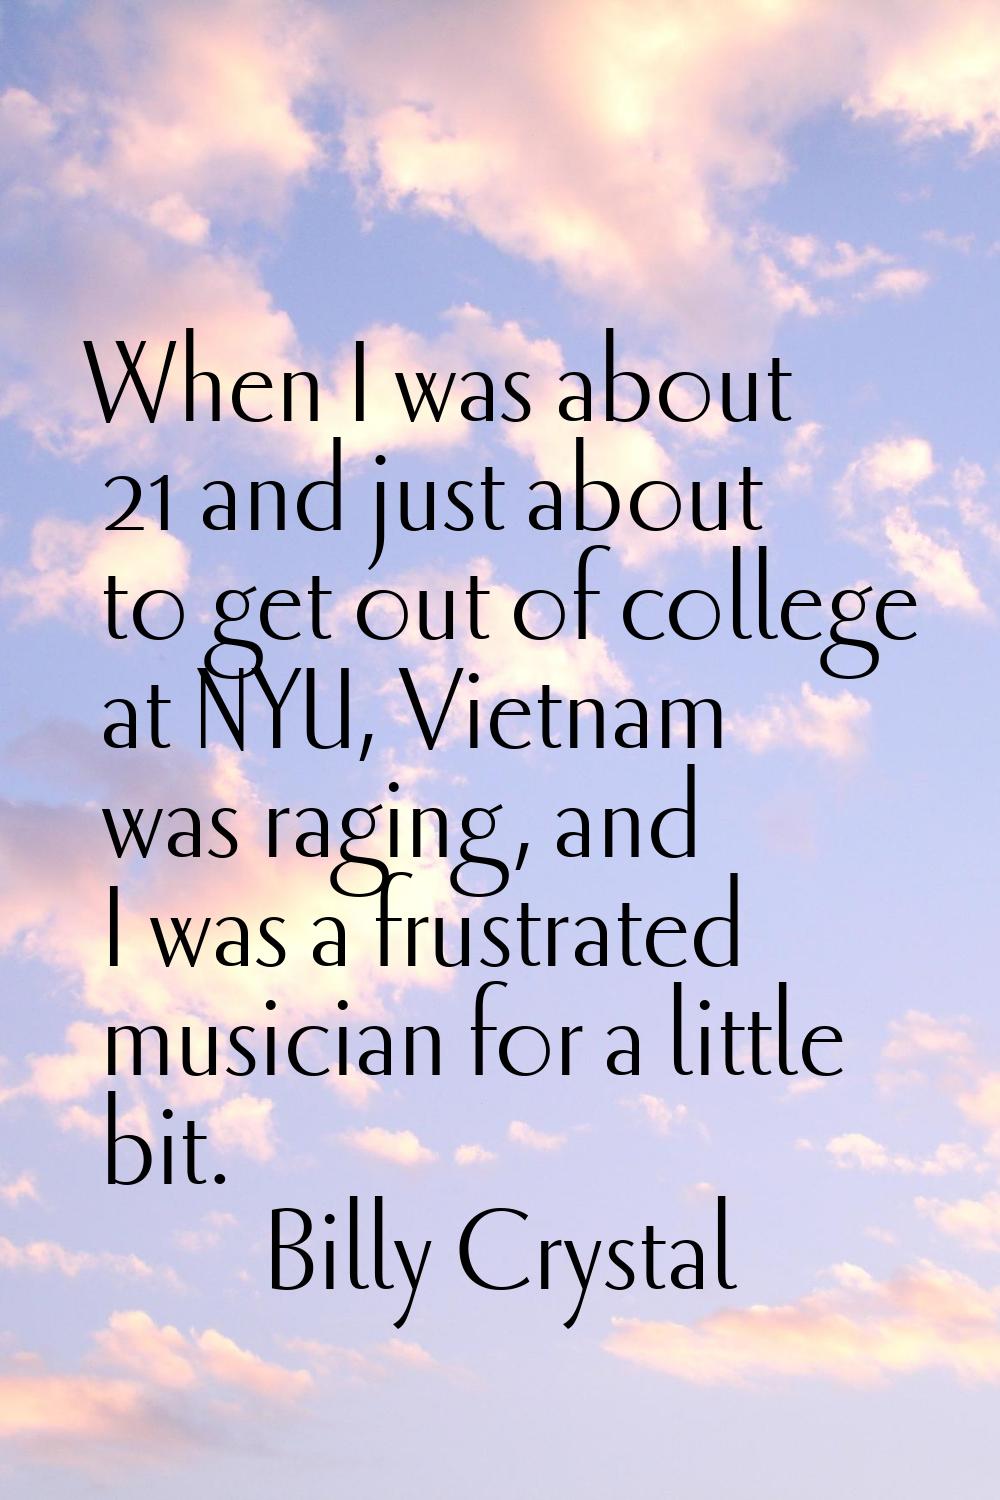 When I was about 21 and just about to get out of college at NYU, Vietnam was raging, and I was a fr